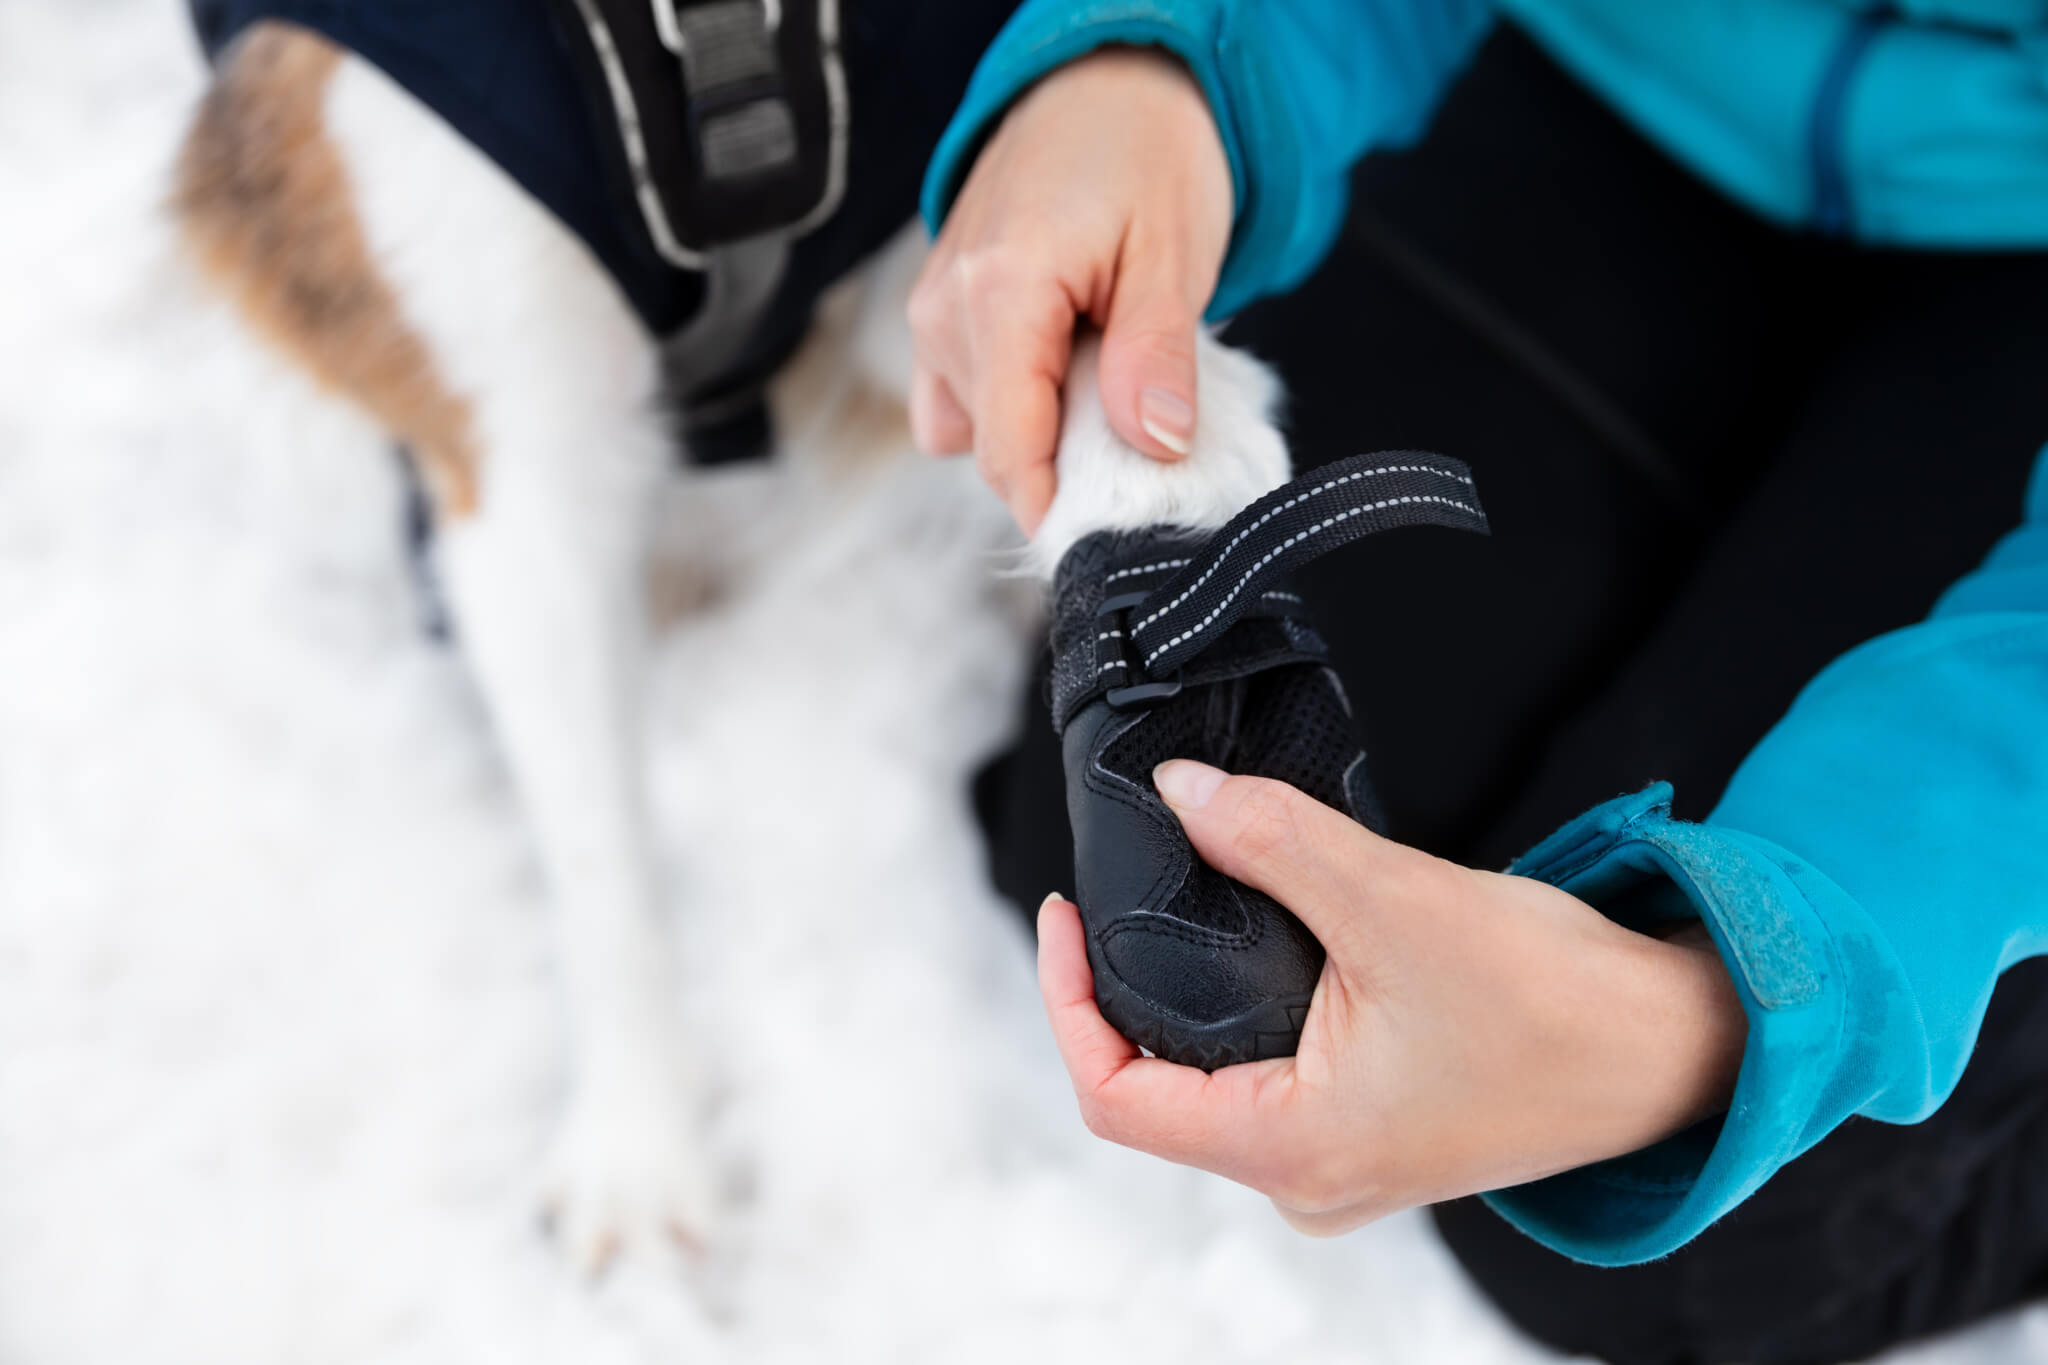 Woman dressing dog booties or shoes at the dog paws